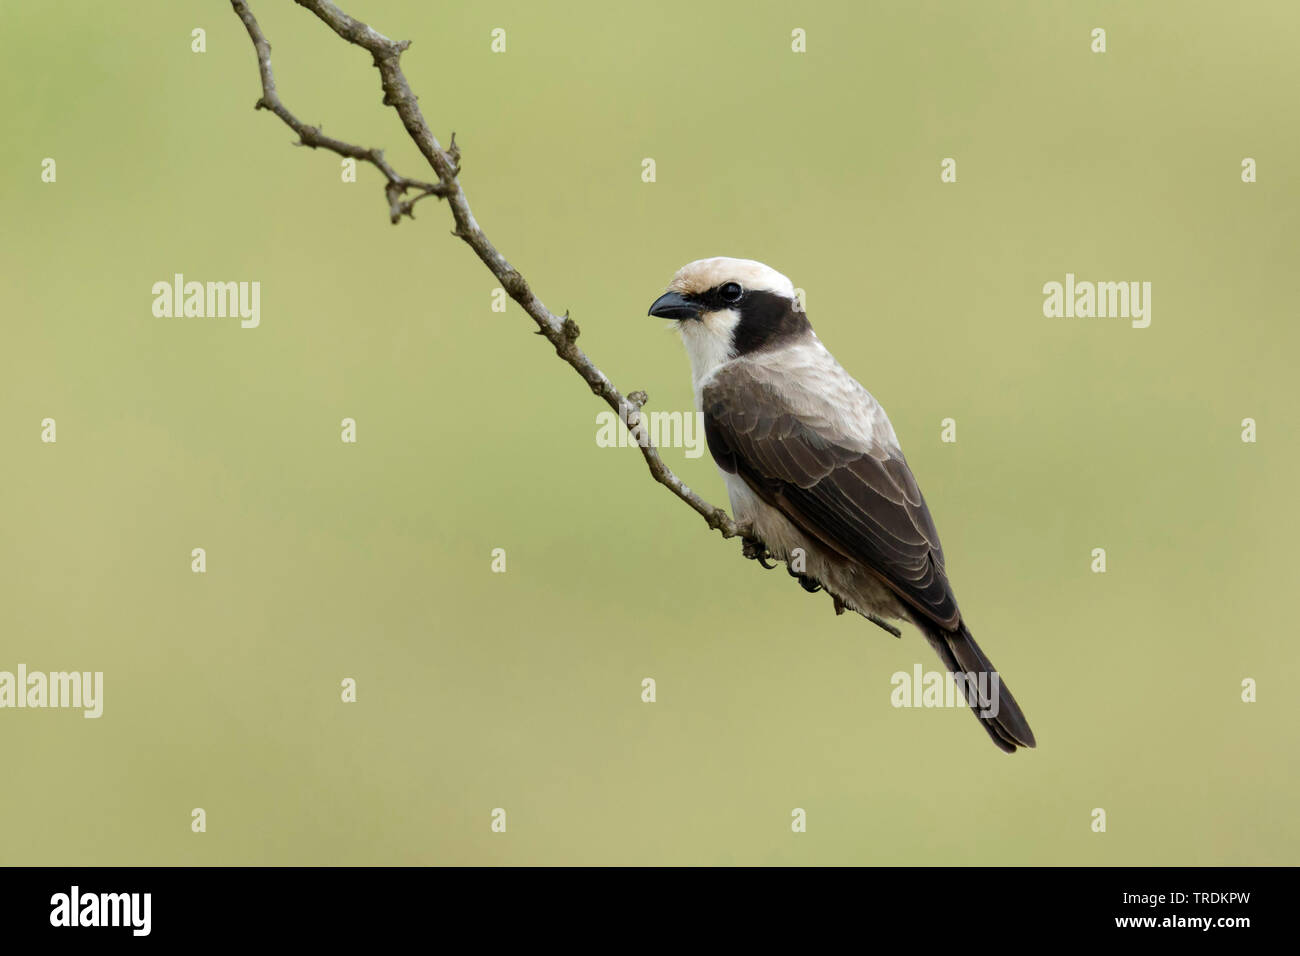 White-crowned shrike (Eurocephalus anguitimens), sitting on a branch , South Africa, Mpumalanga, Kruger National Park Stock Photo